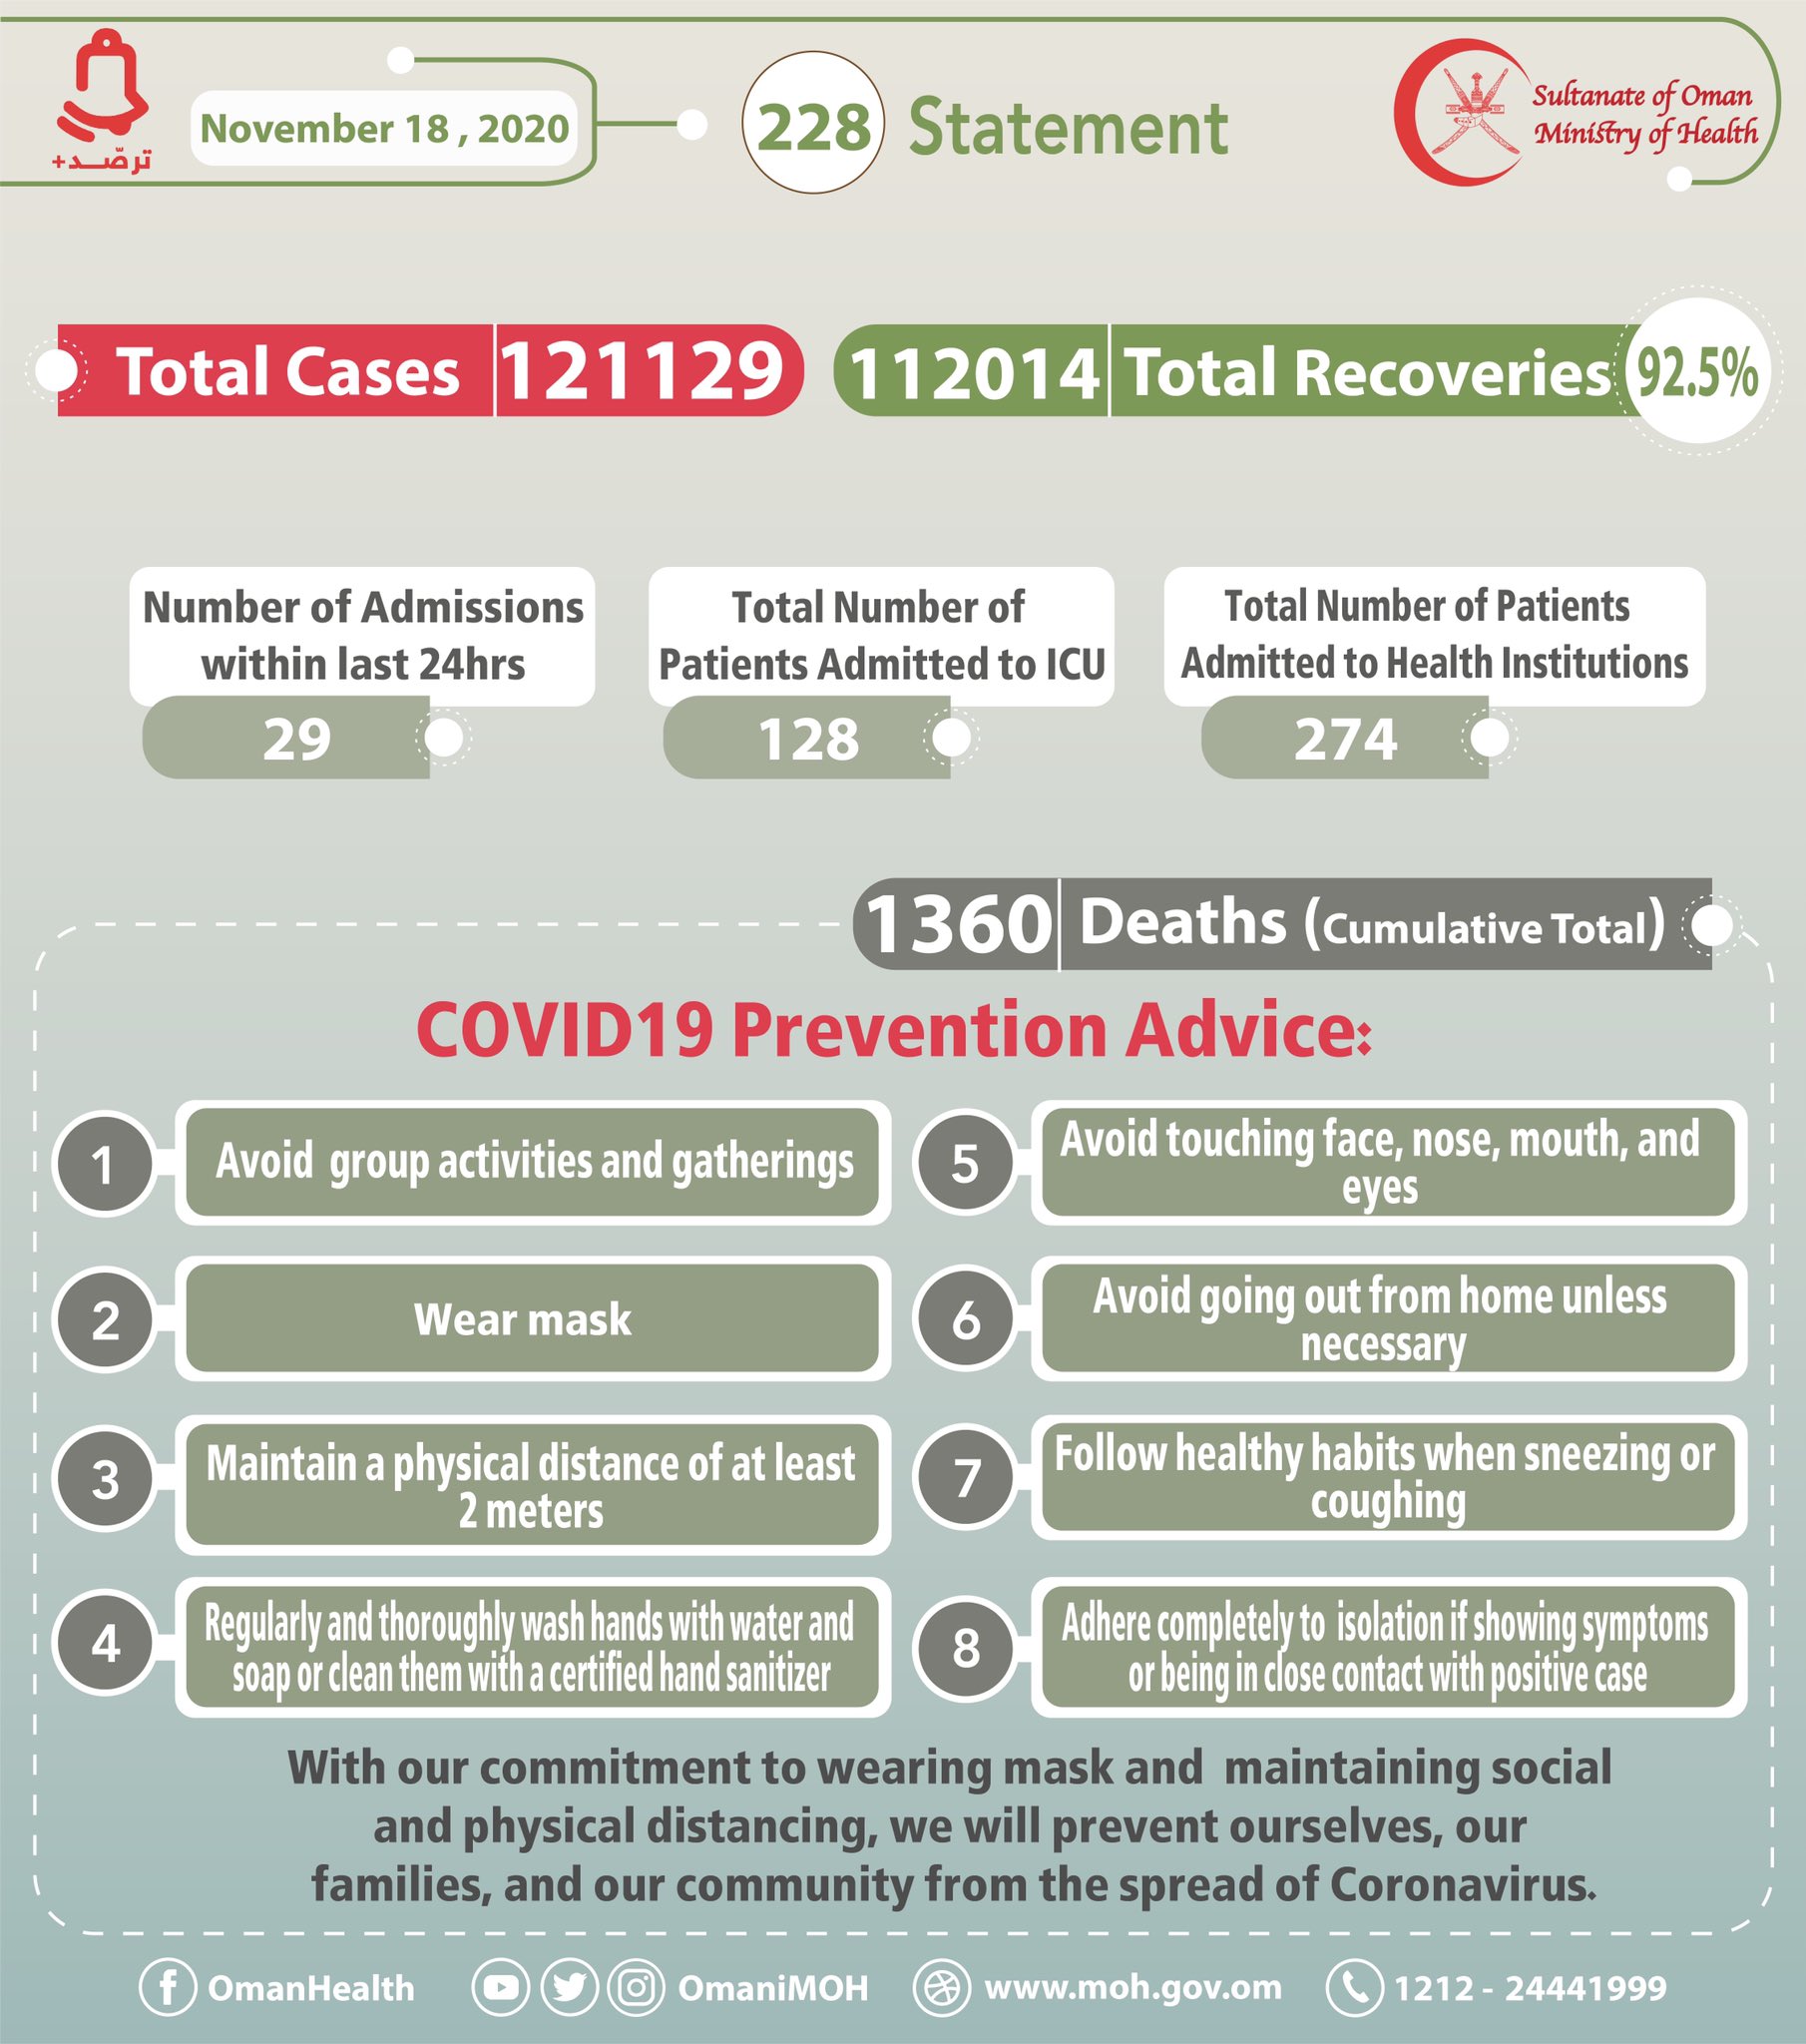 411 New Corona cases in Oman, Total cases Reached to 121129